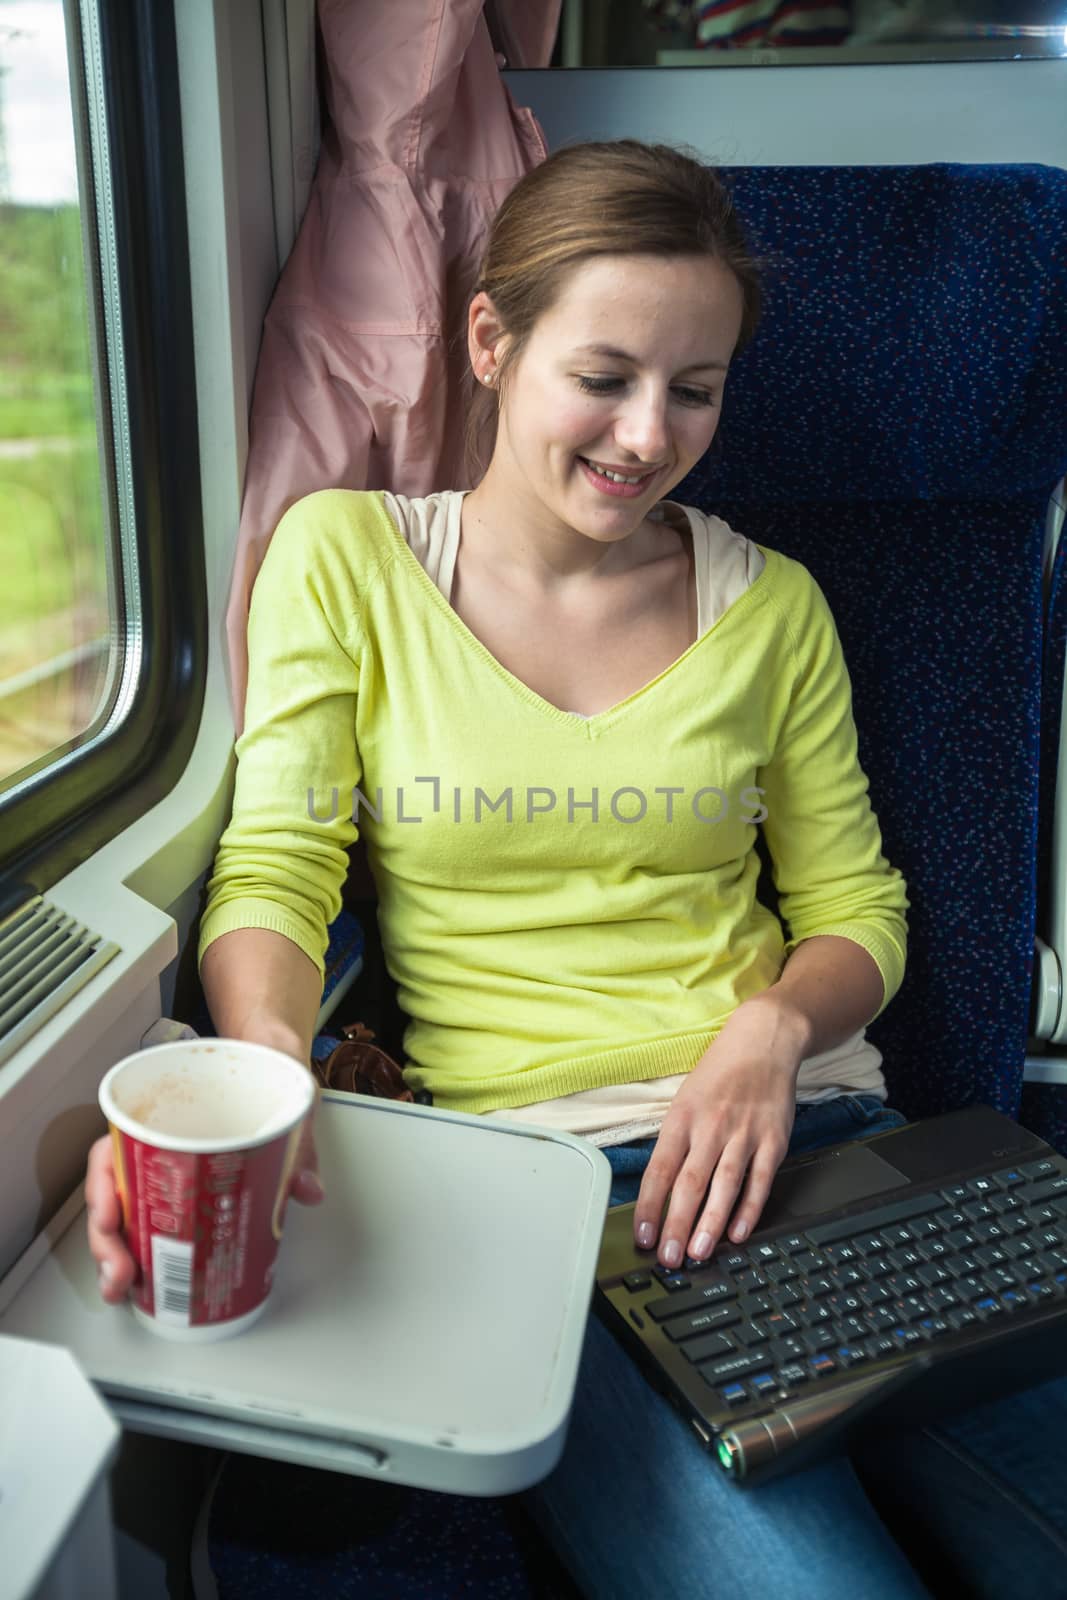 Young woman traveling by train by viktor_cap